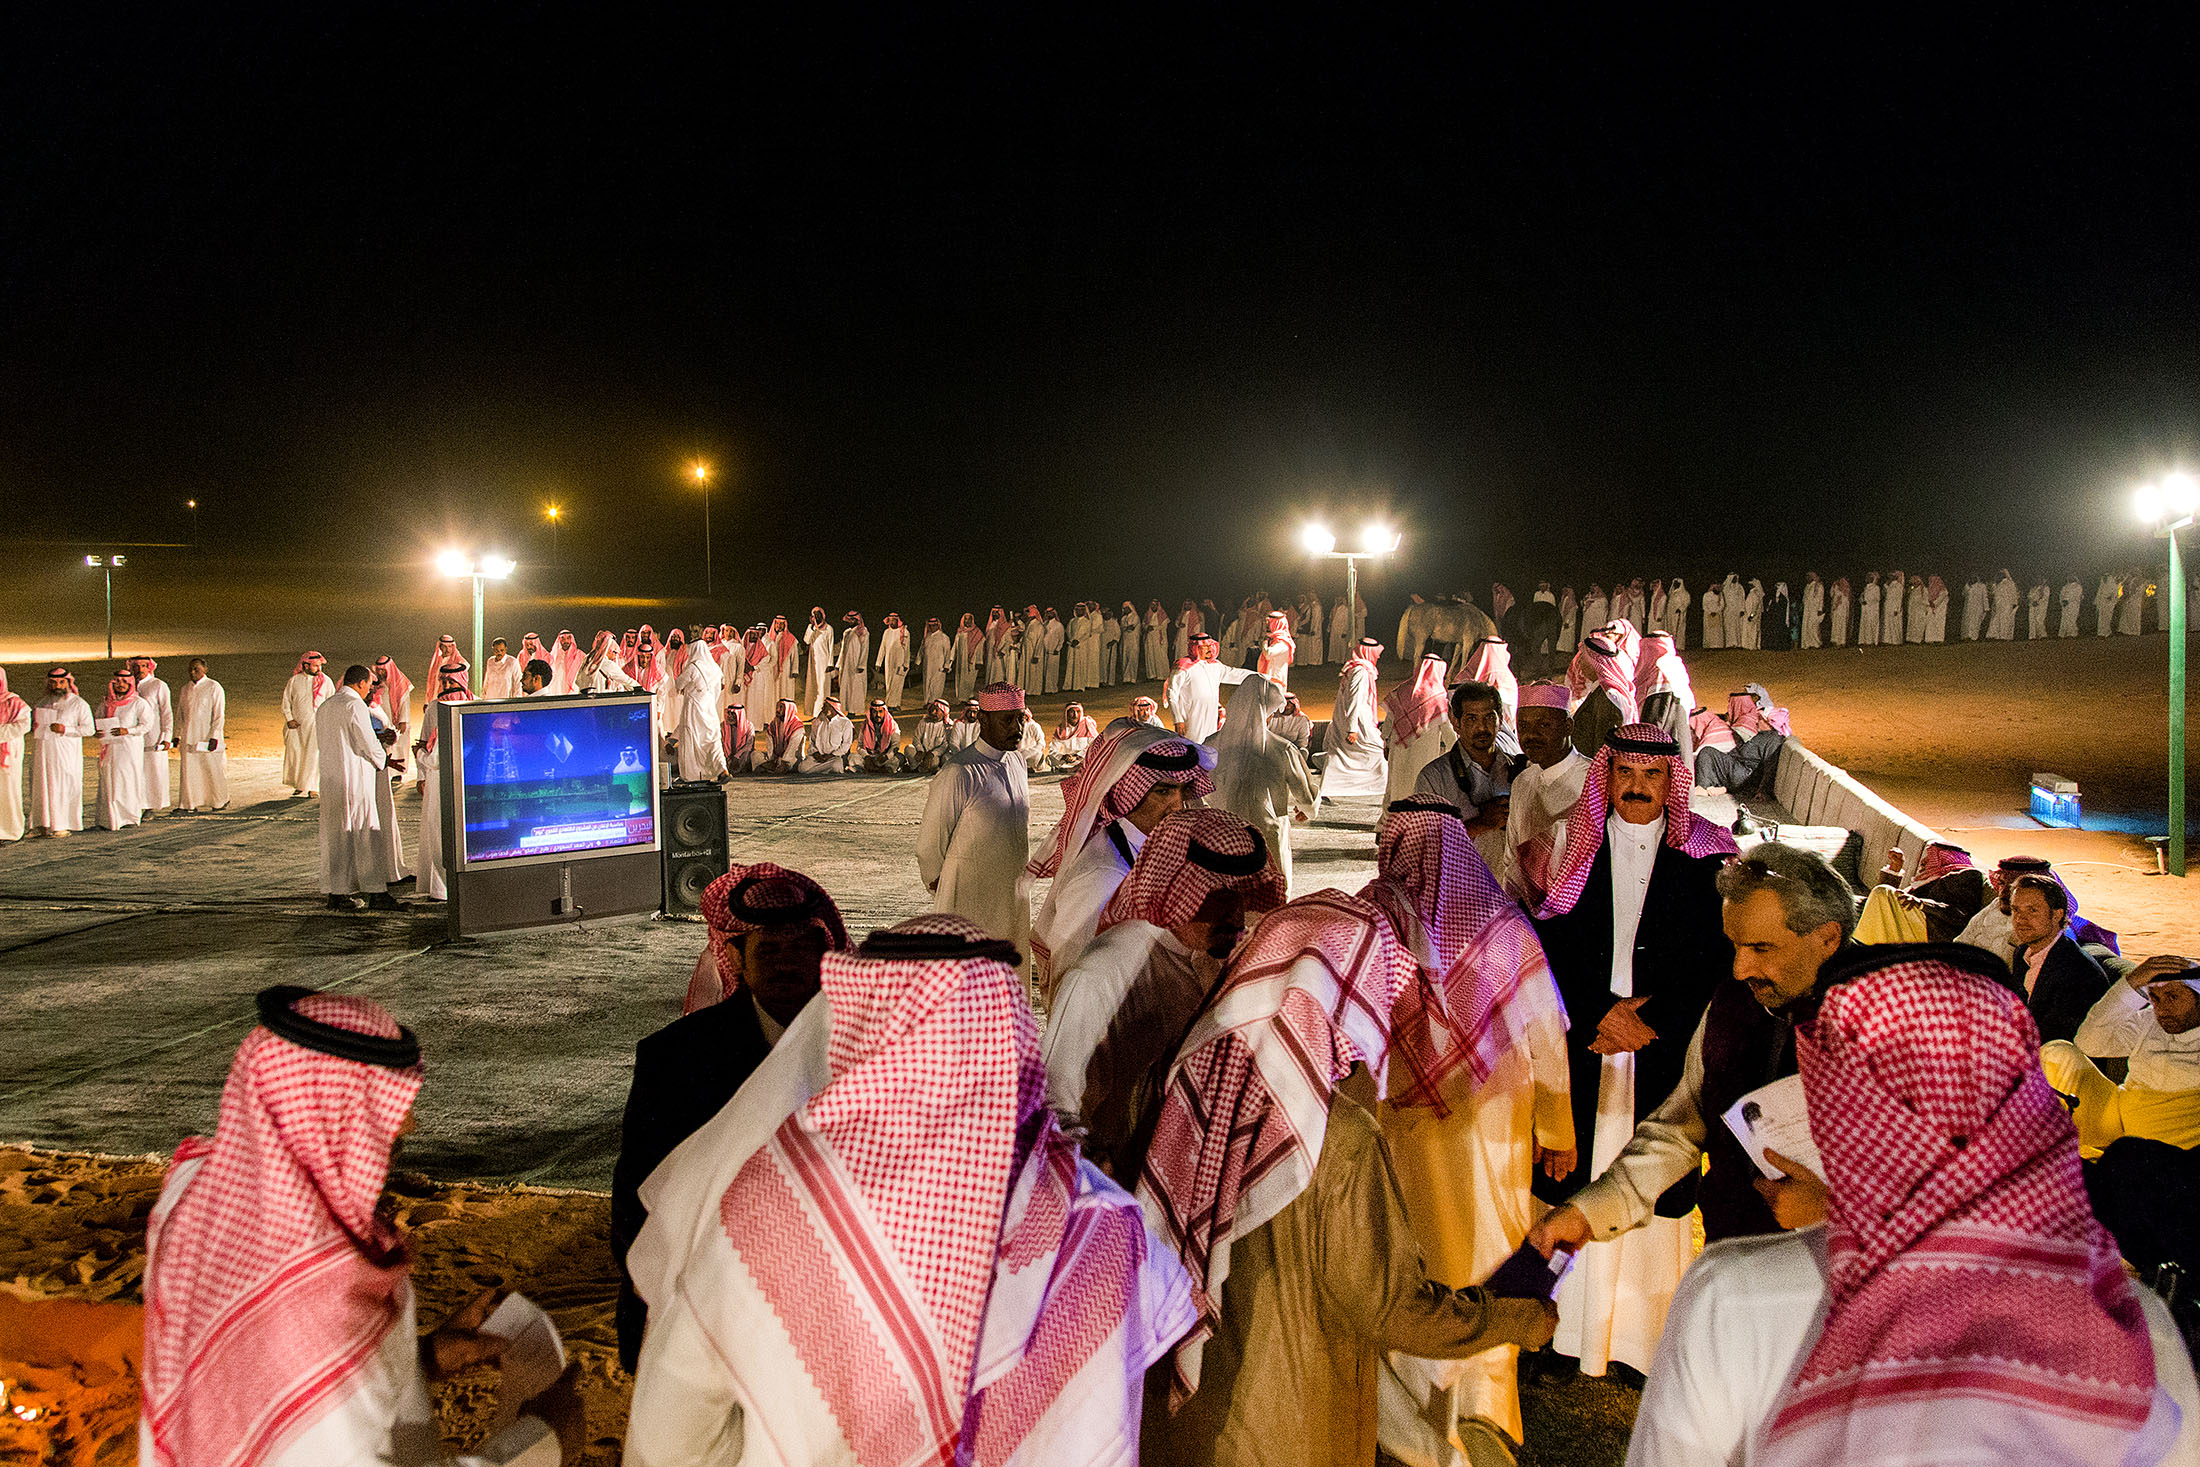 Prince Alwaleed bin Talal, right, greets guests&nbsp;at a&nbsp;traditional Bedouin ceremony&nbsp;in the desert&nbsp;on Oct. 26, 2017.